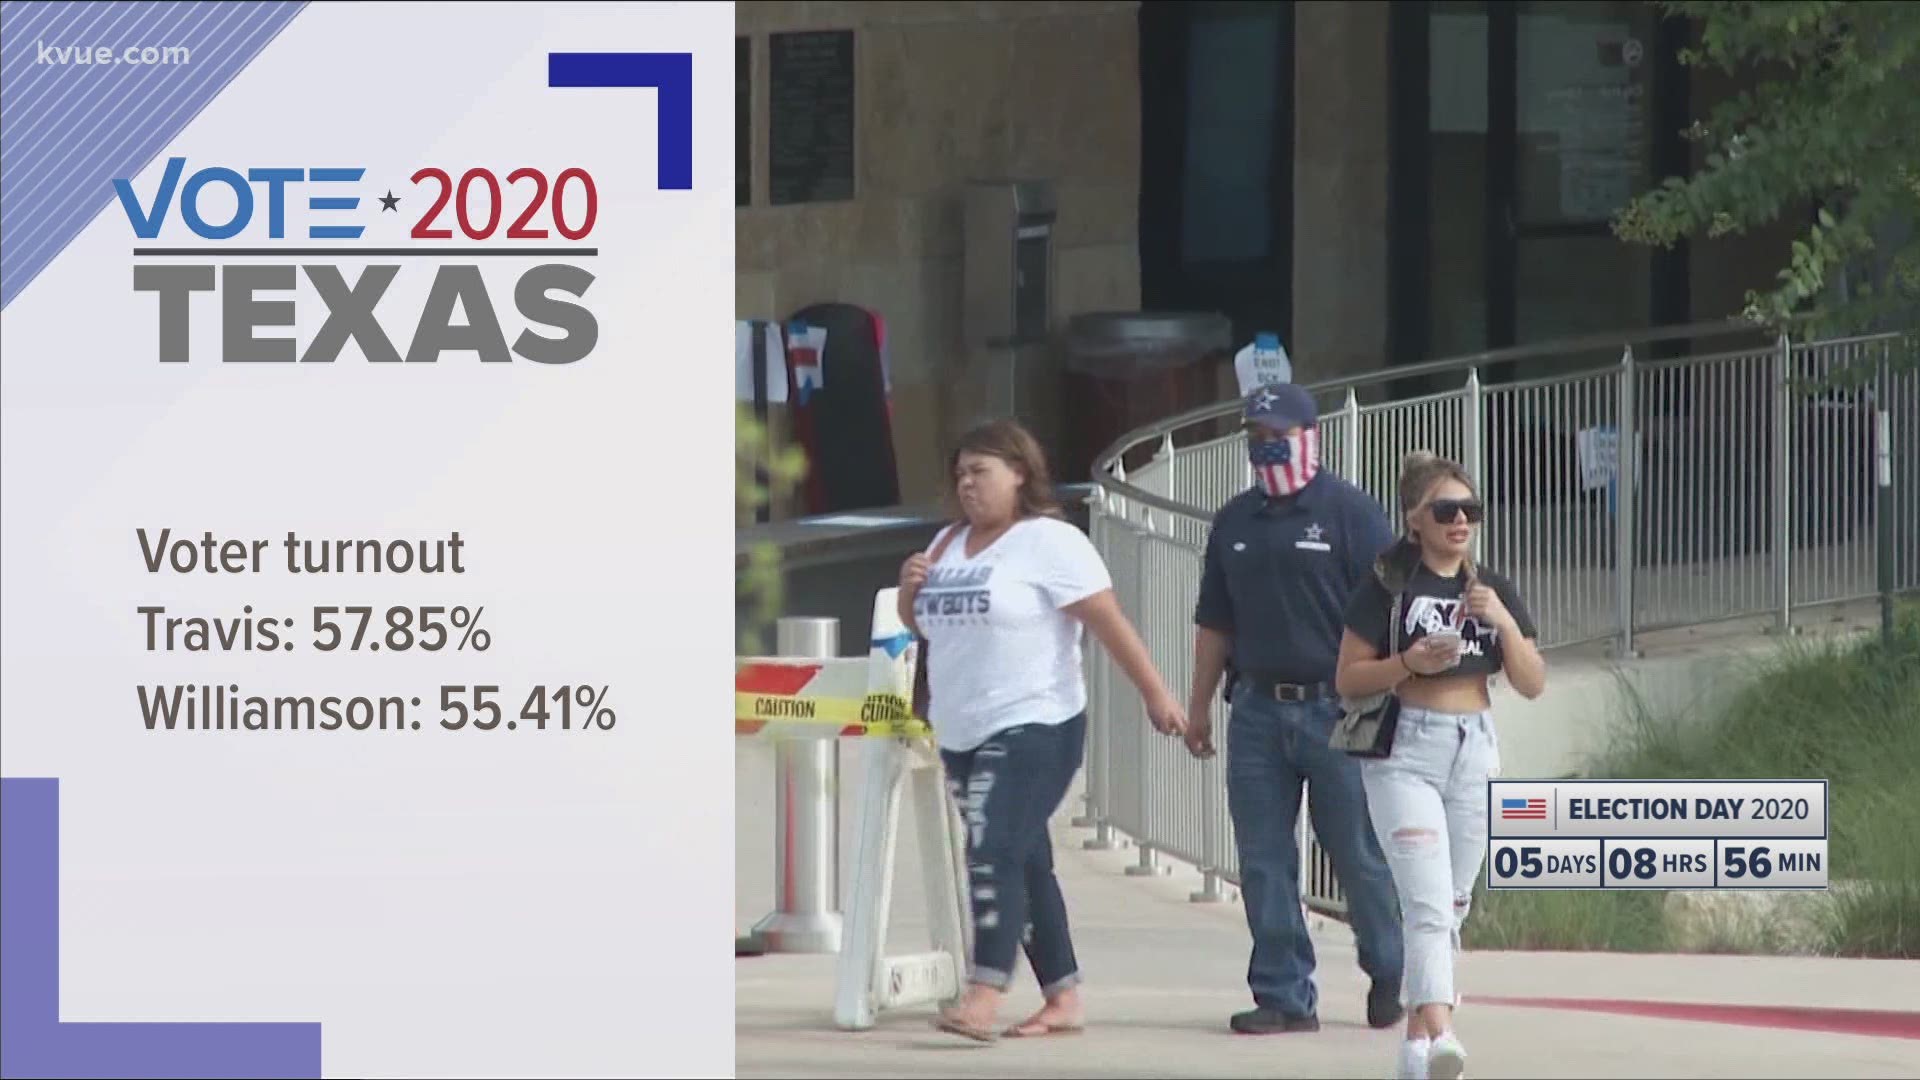 More people have cast early ballots in Travis County in 2020 than the total number of ballots cast in the 2016 election.